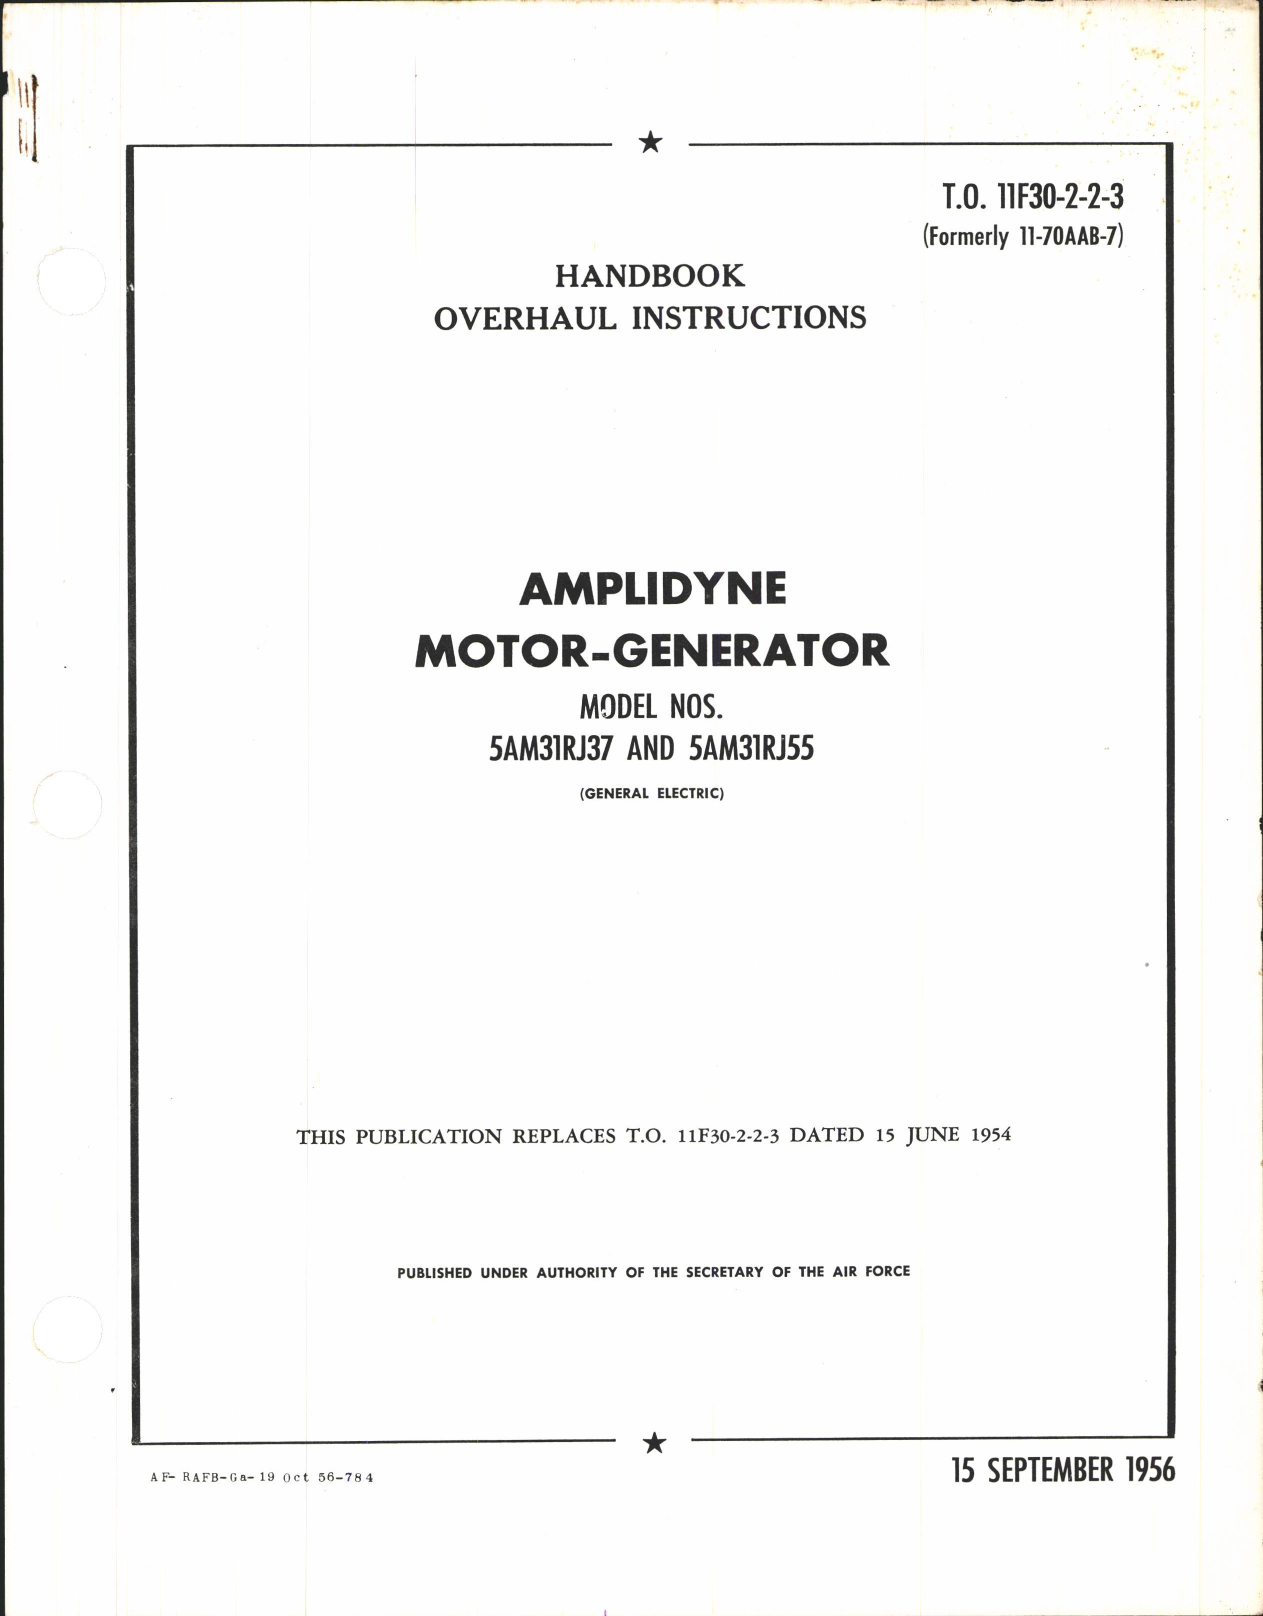 Sample page 1 from AirCorps Library document: Overhaul Instructions for Amplidyne Motor-Generator Model Nos. 5AM31RJ37 and 5AM31RJ55